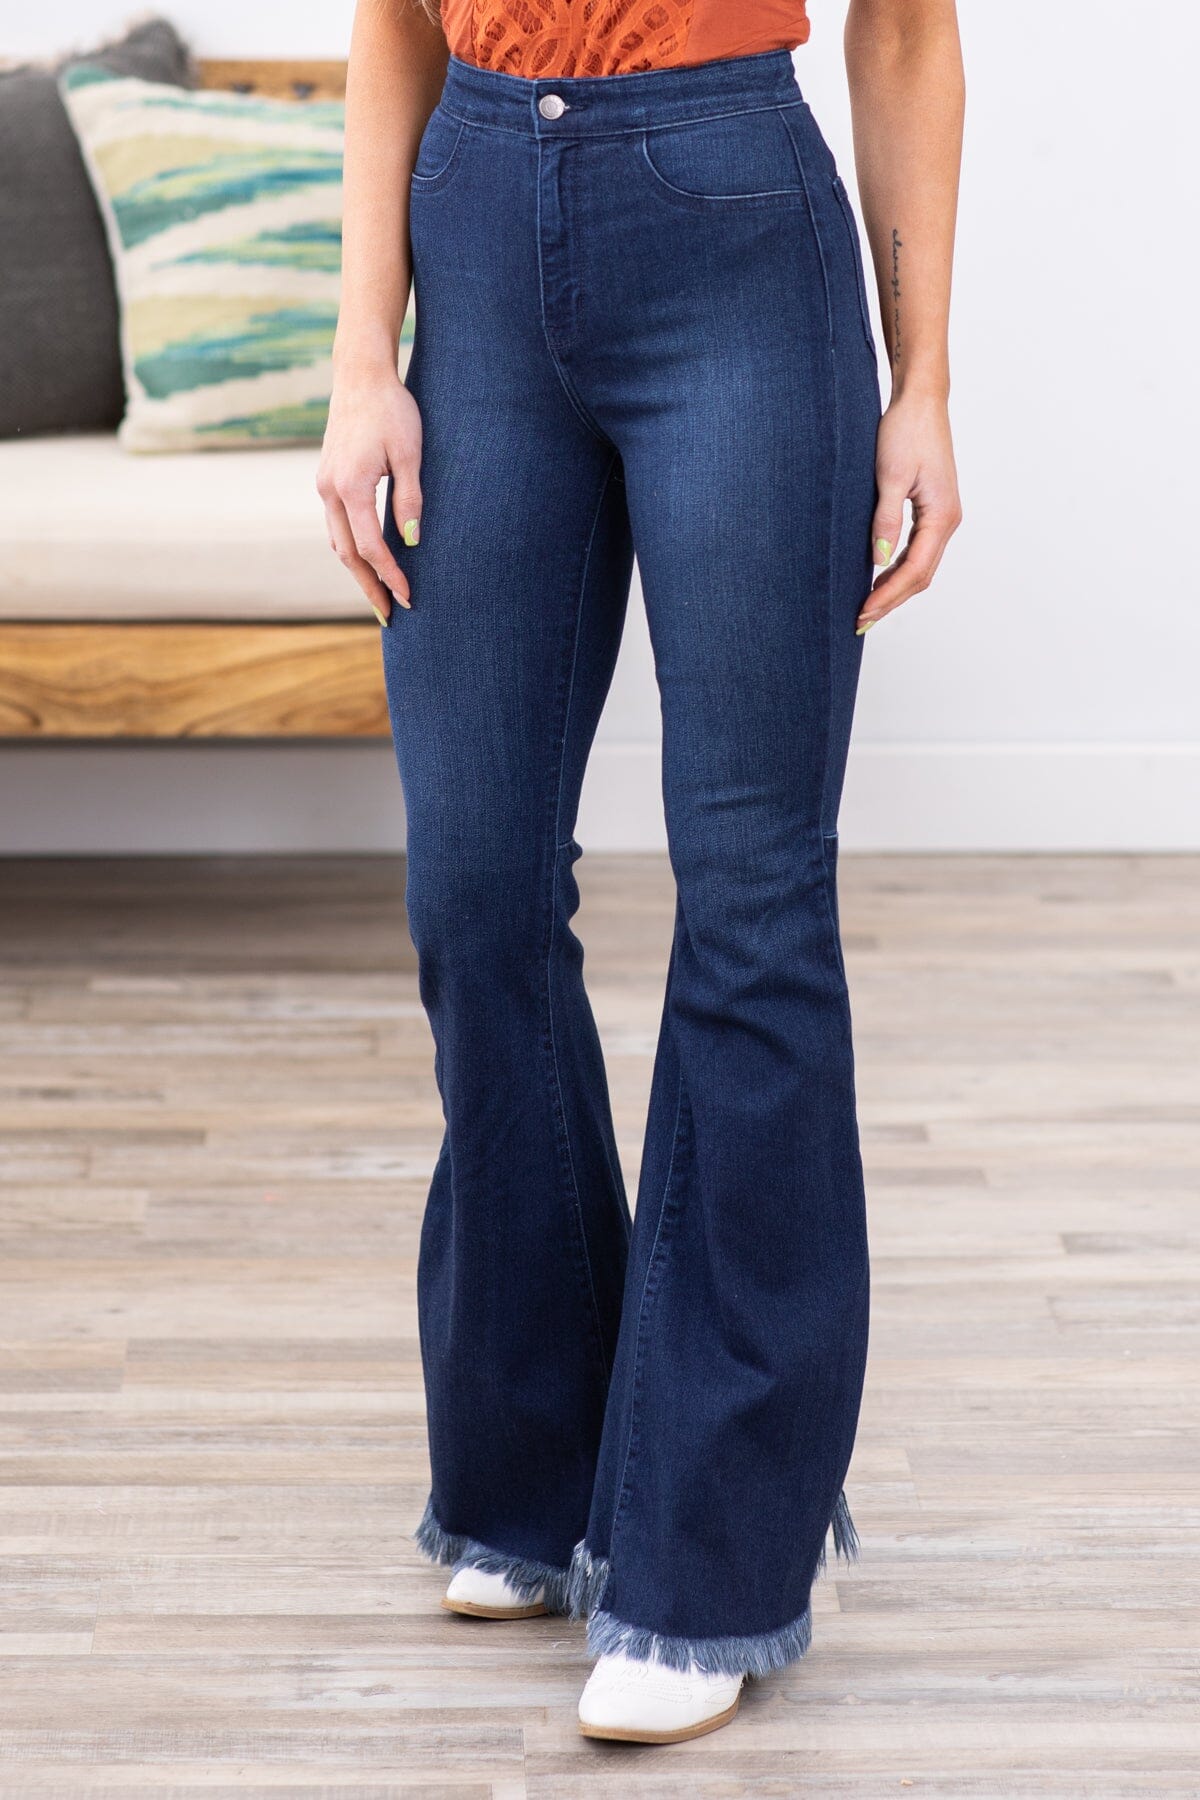 Cello High Rise Fray Hem Flare Jeans - Filly Flair